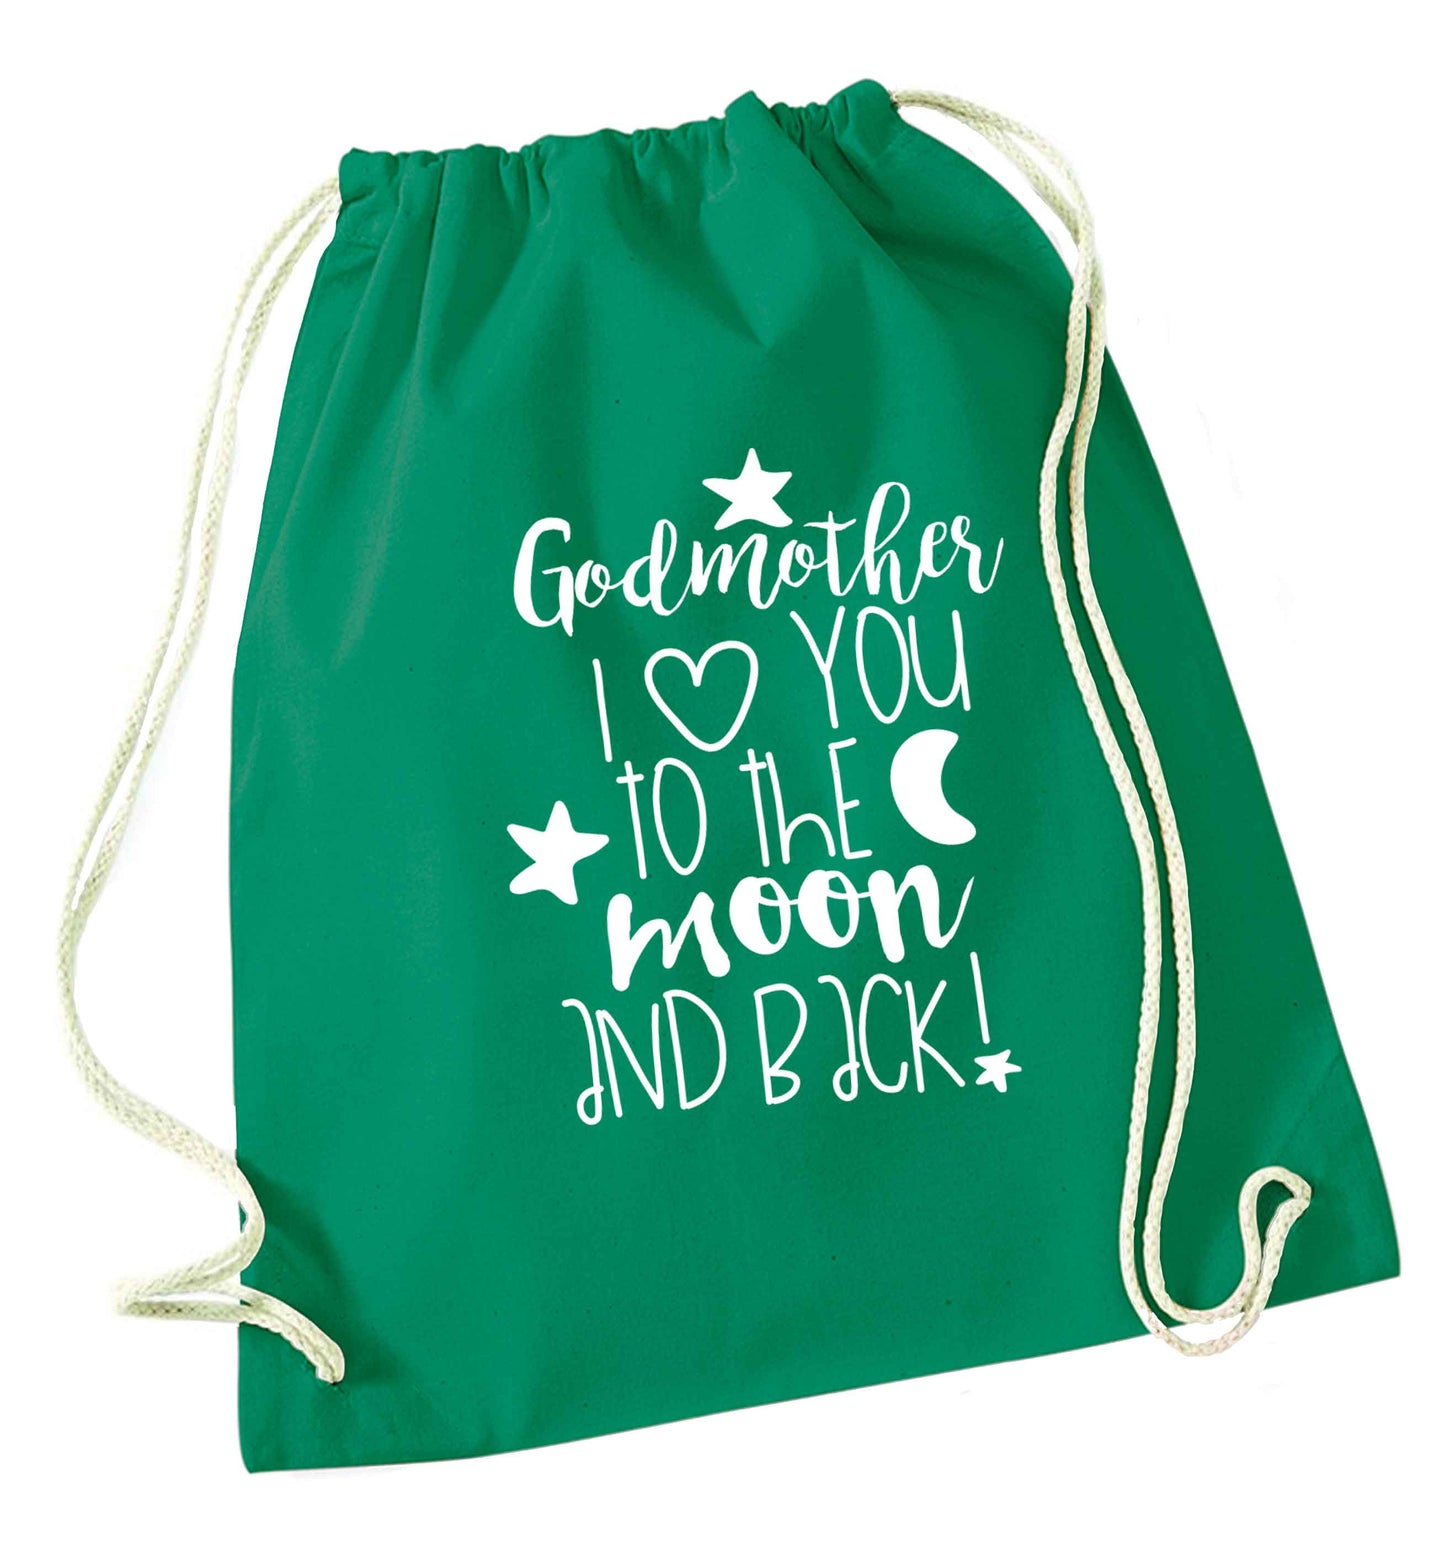 Godmother I love you to the moon and back green drawstring bag